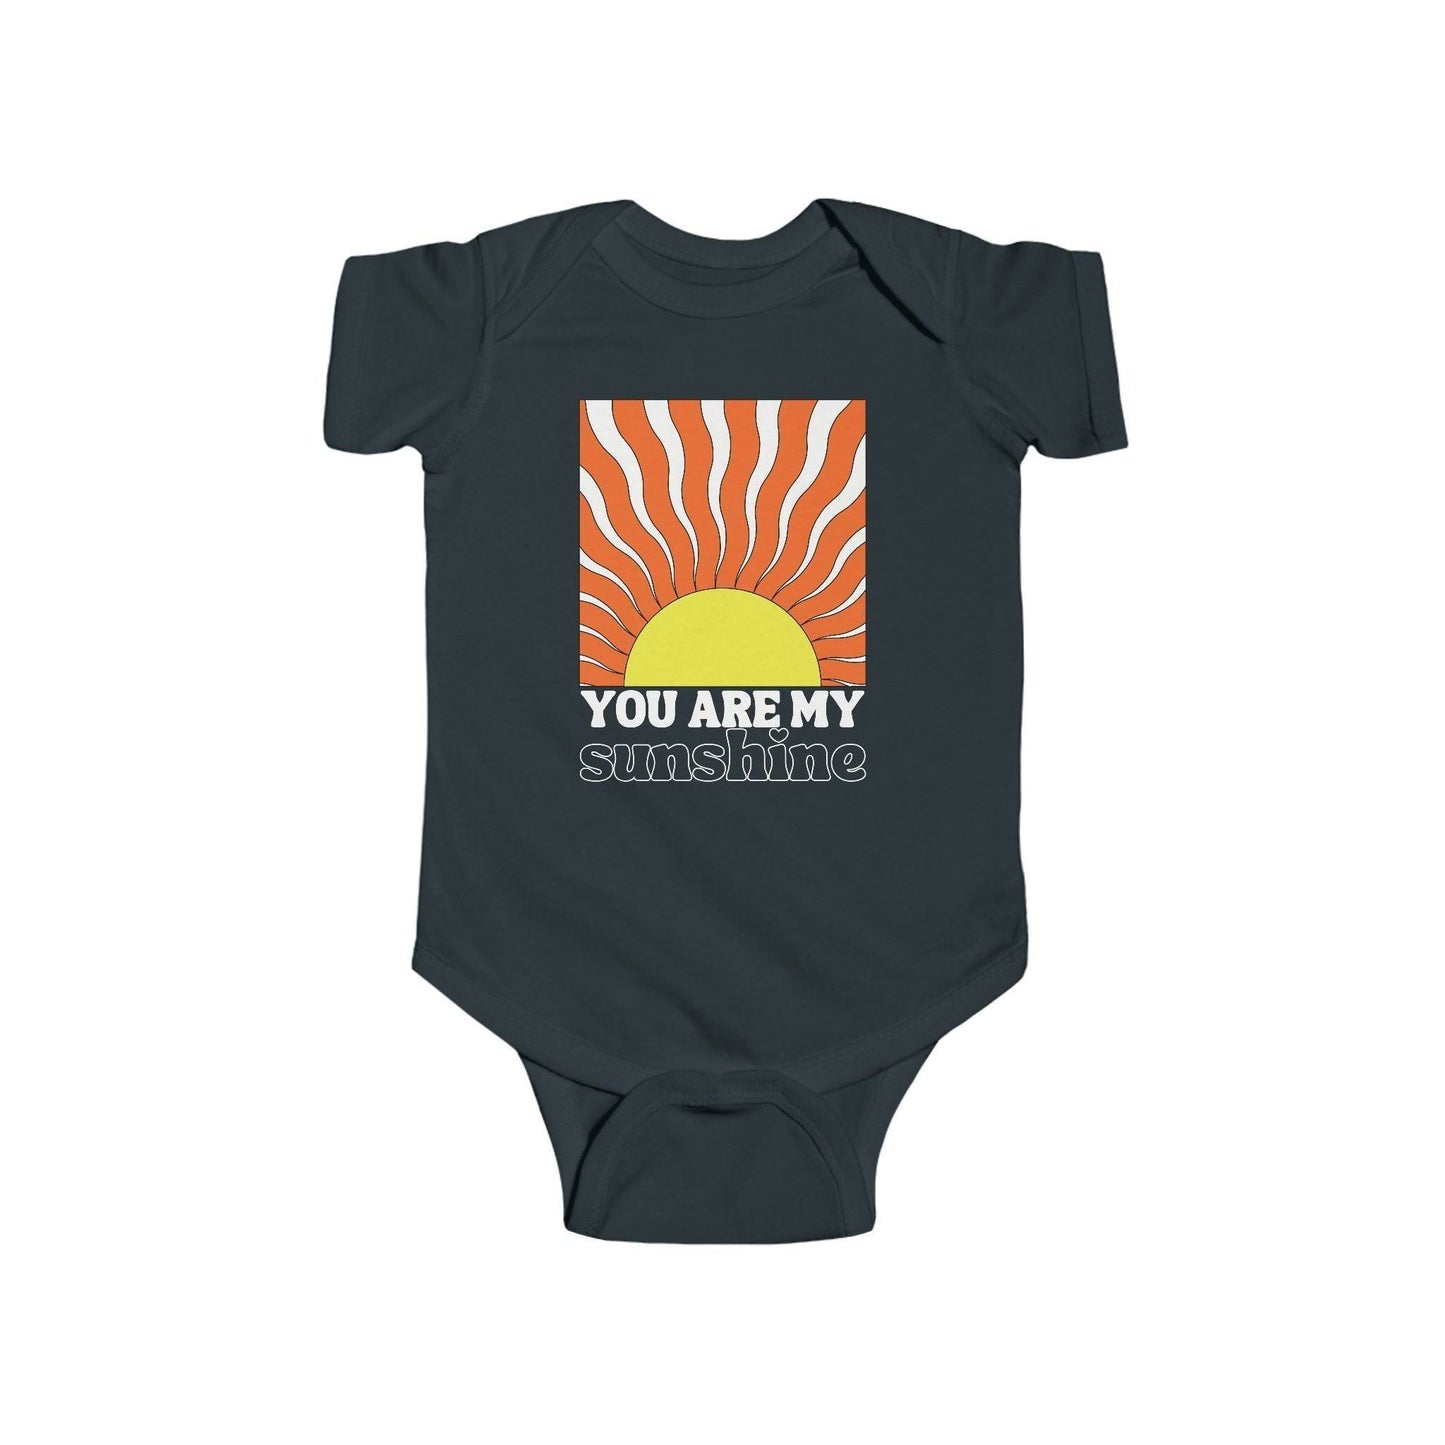 You are My Sunshine Infant Onesie Black